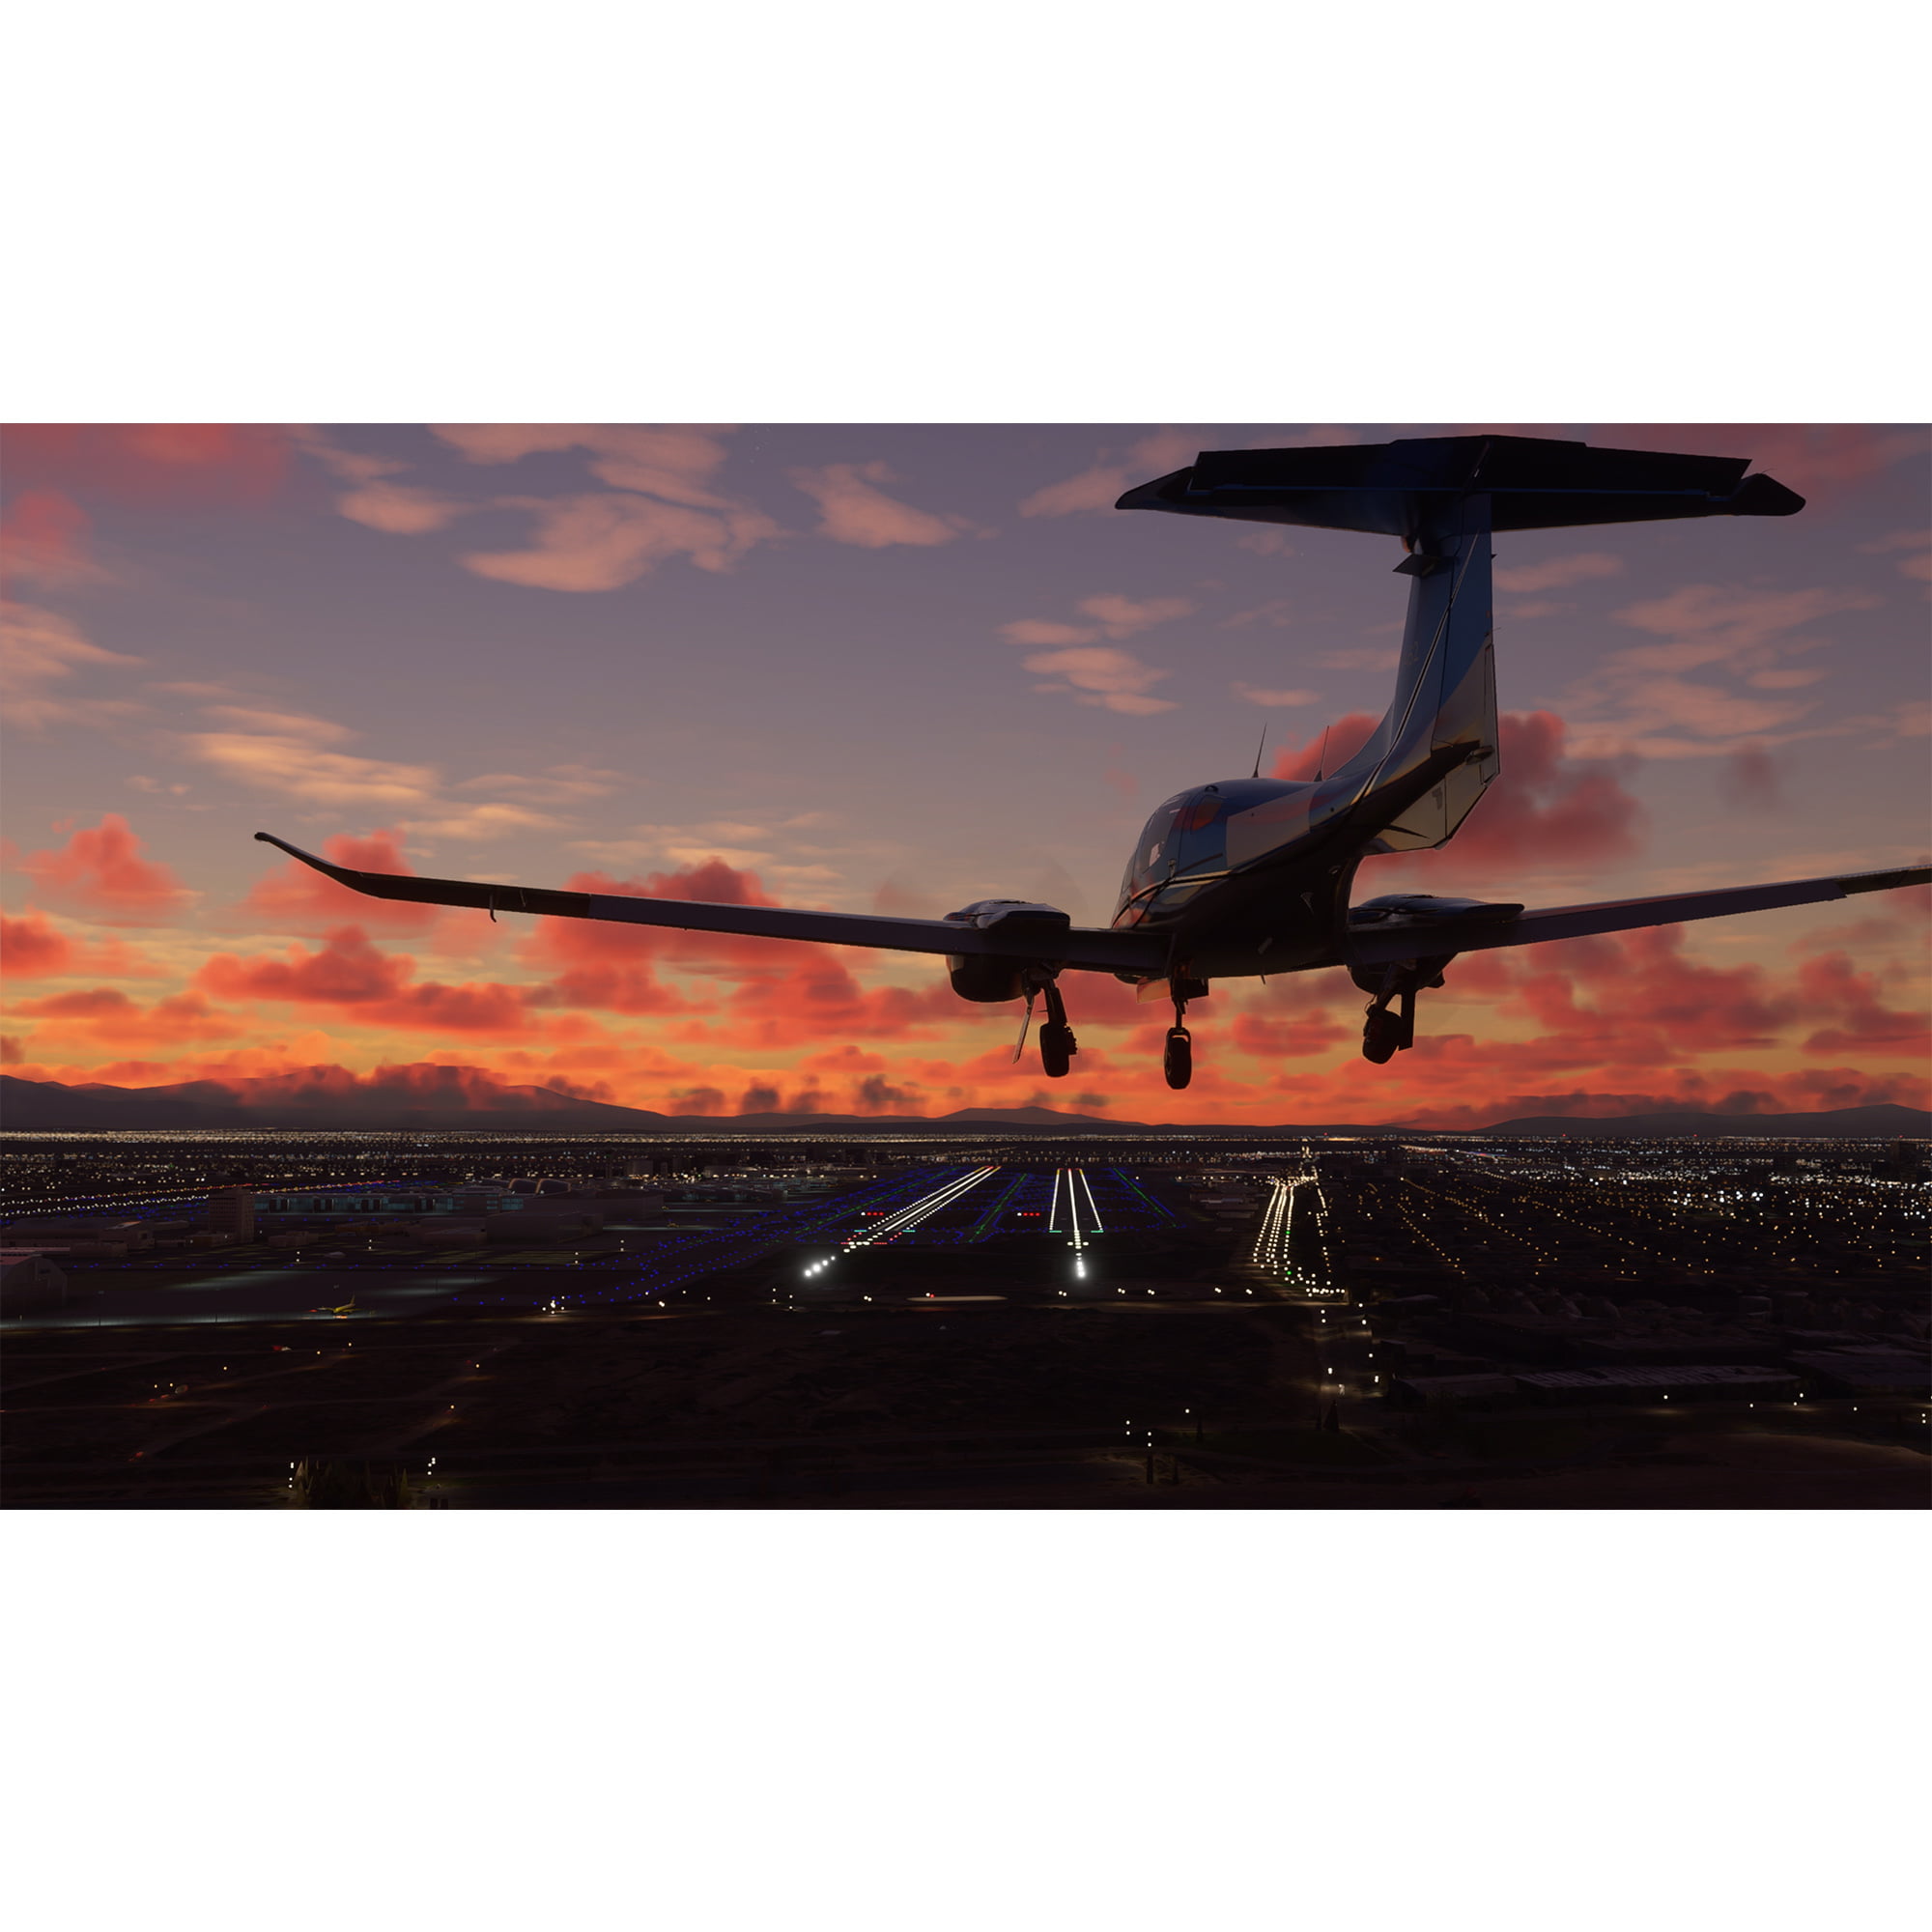 Microsoft Flight Simulator Standard Edition - For Xbox Series X - ESRB  Rated E (Everyone) - Releases on 7/27/2021 - Explore the World - 20  Detailed